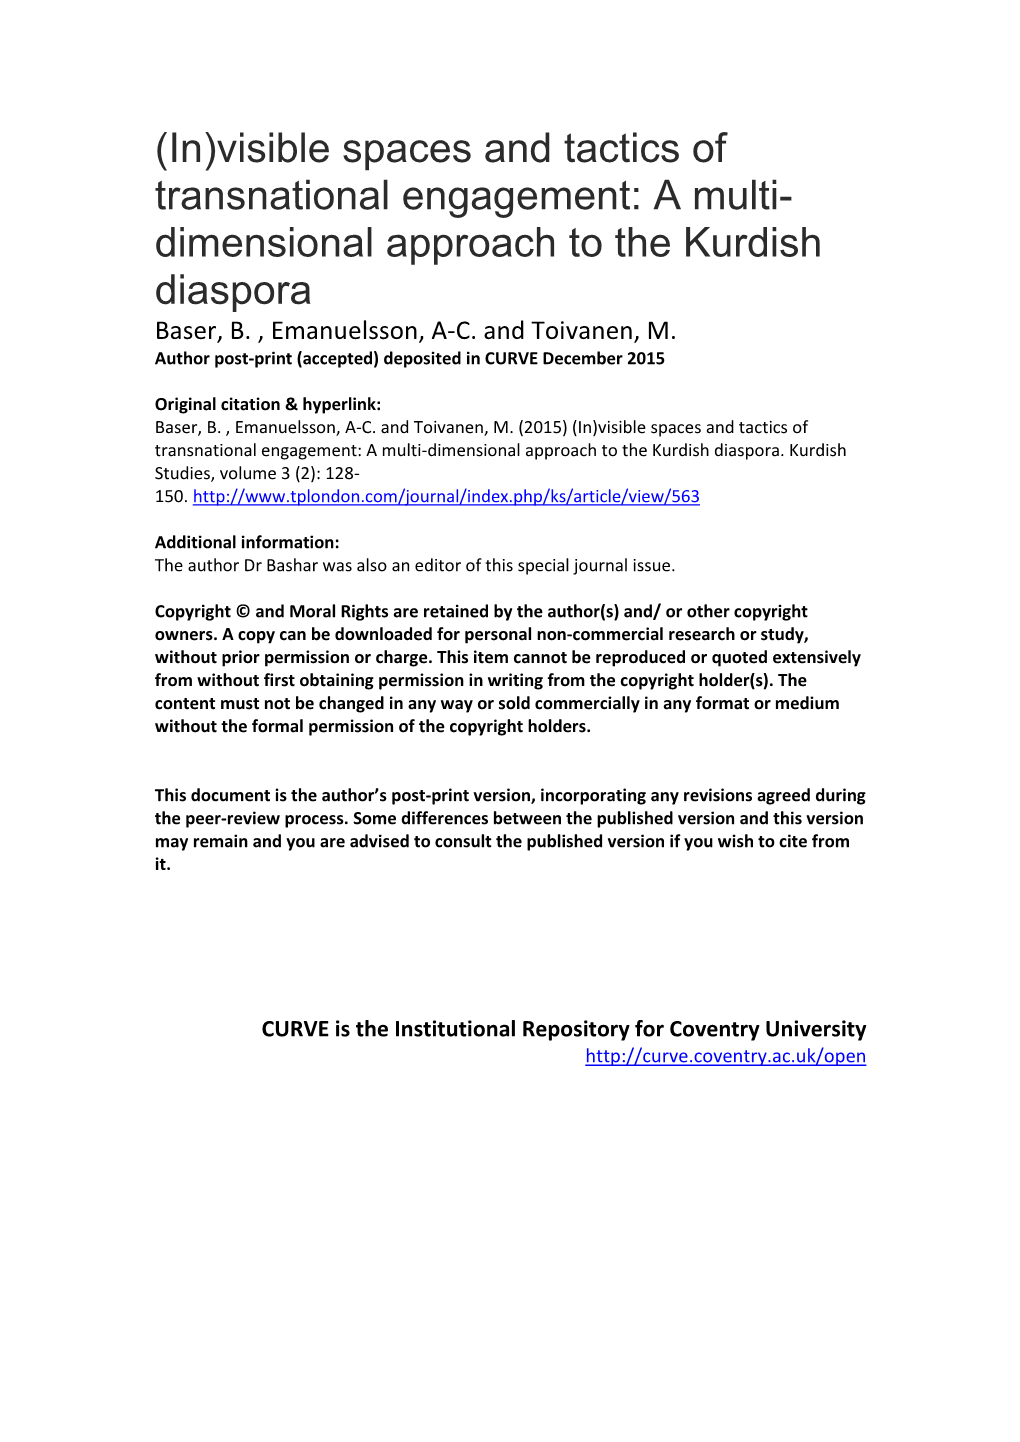 (In)Visible Spaces and Tactics of Transnational Engagement: a Multi- Dimensional Approach to the Kurdish Diaspora Baser, B